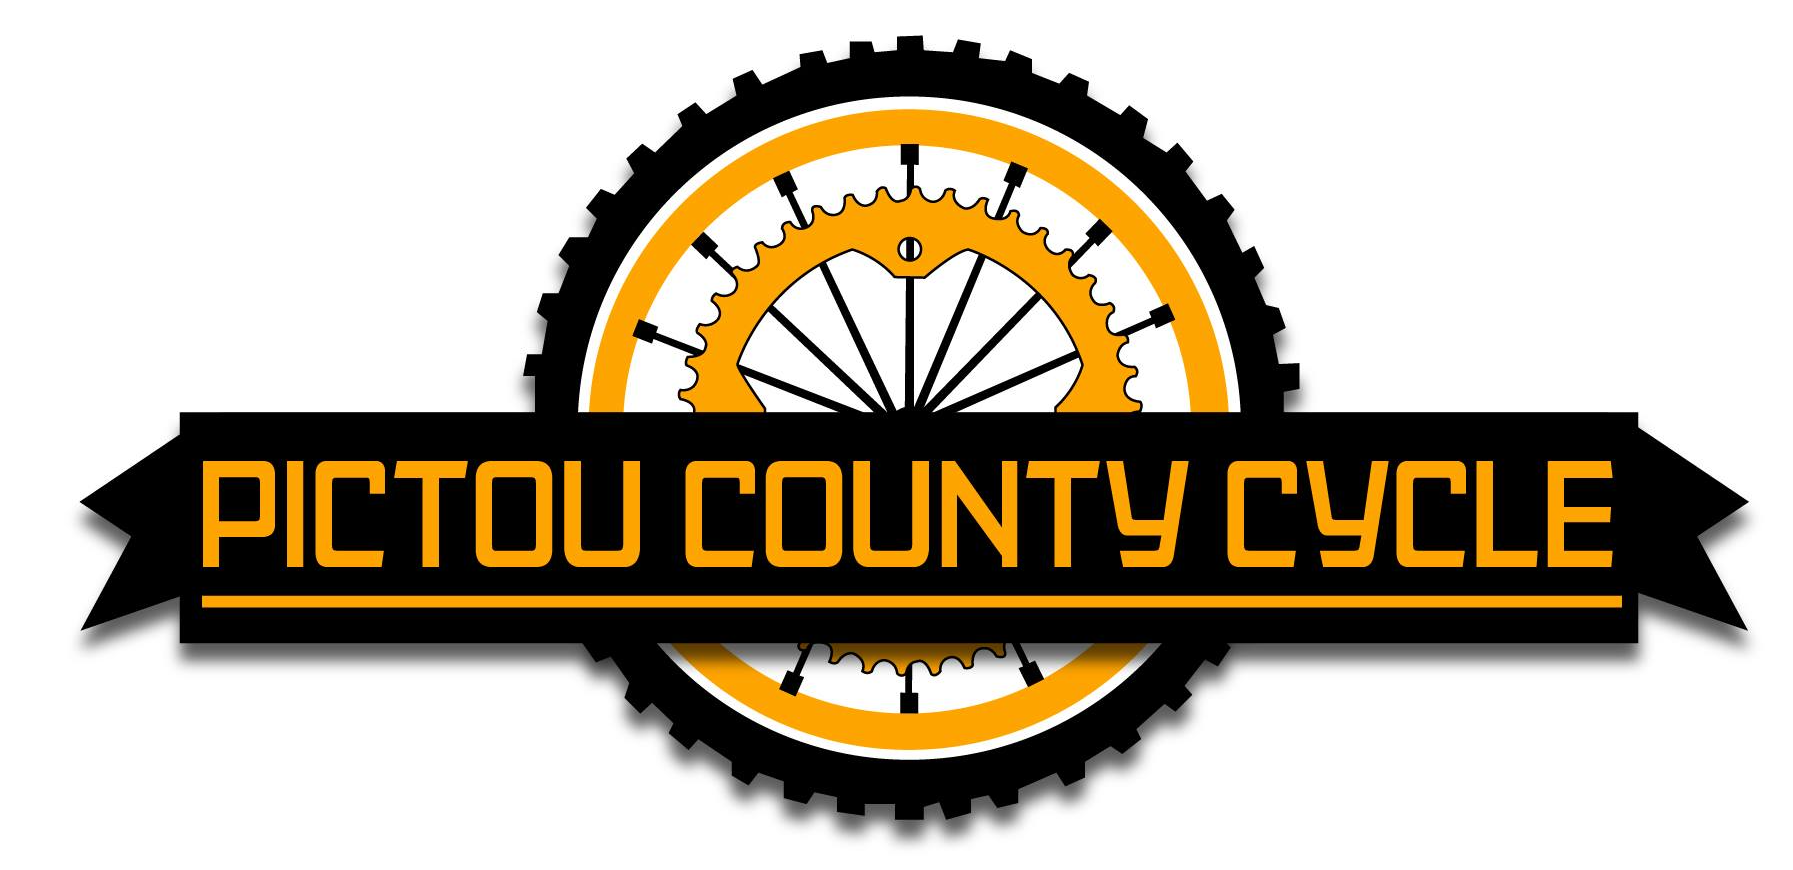 Pictou County Cycle Home Page